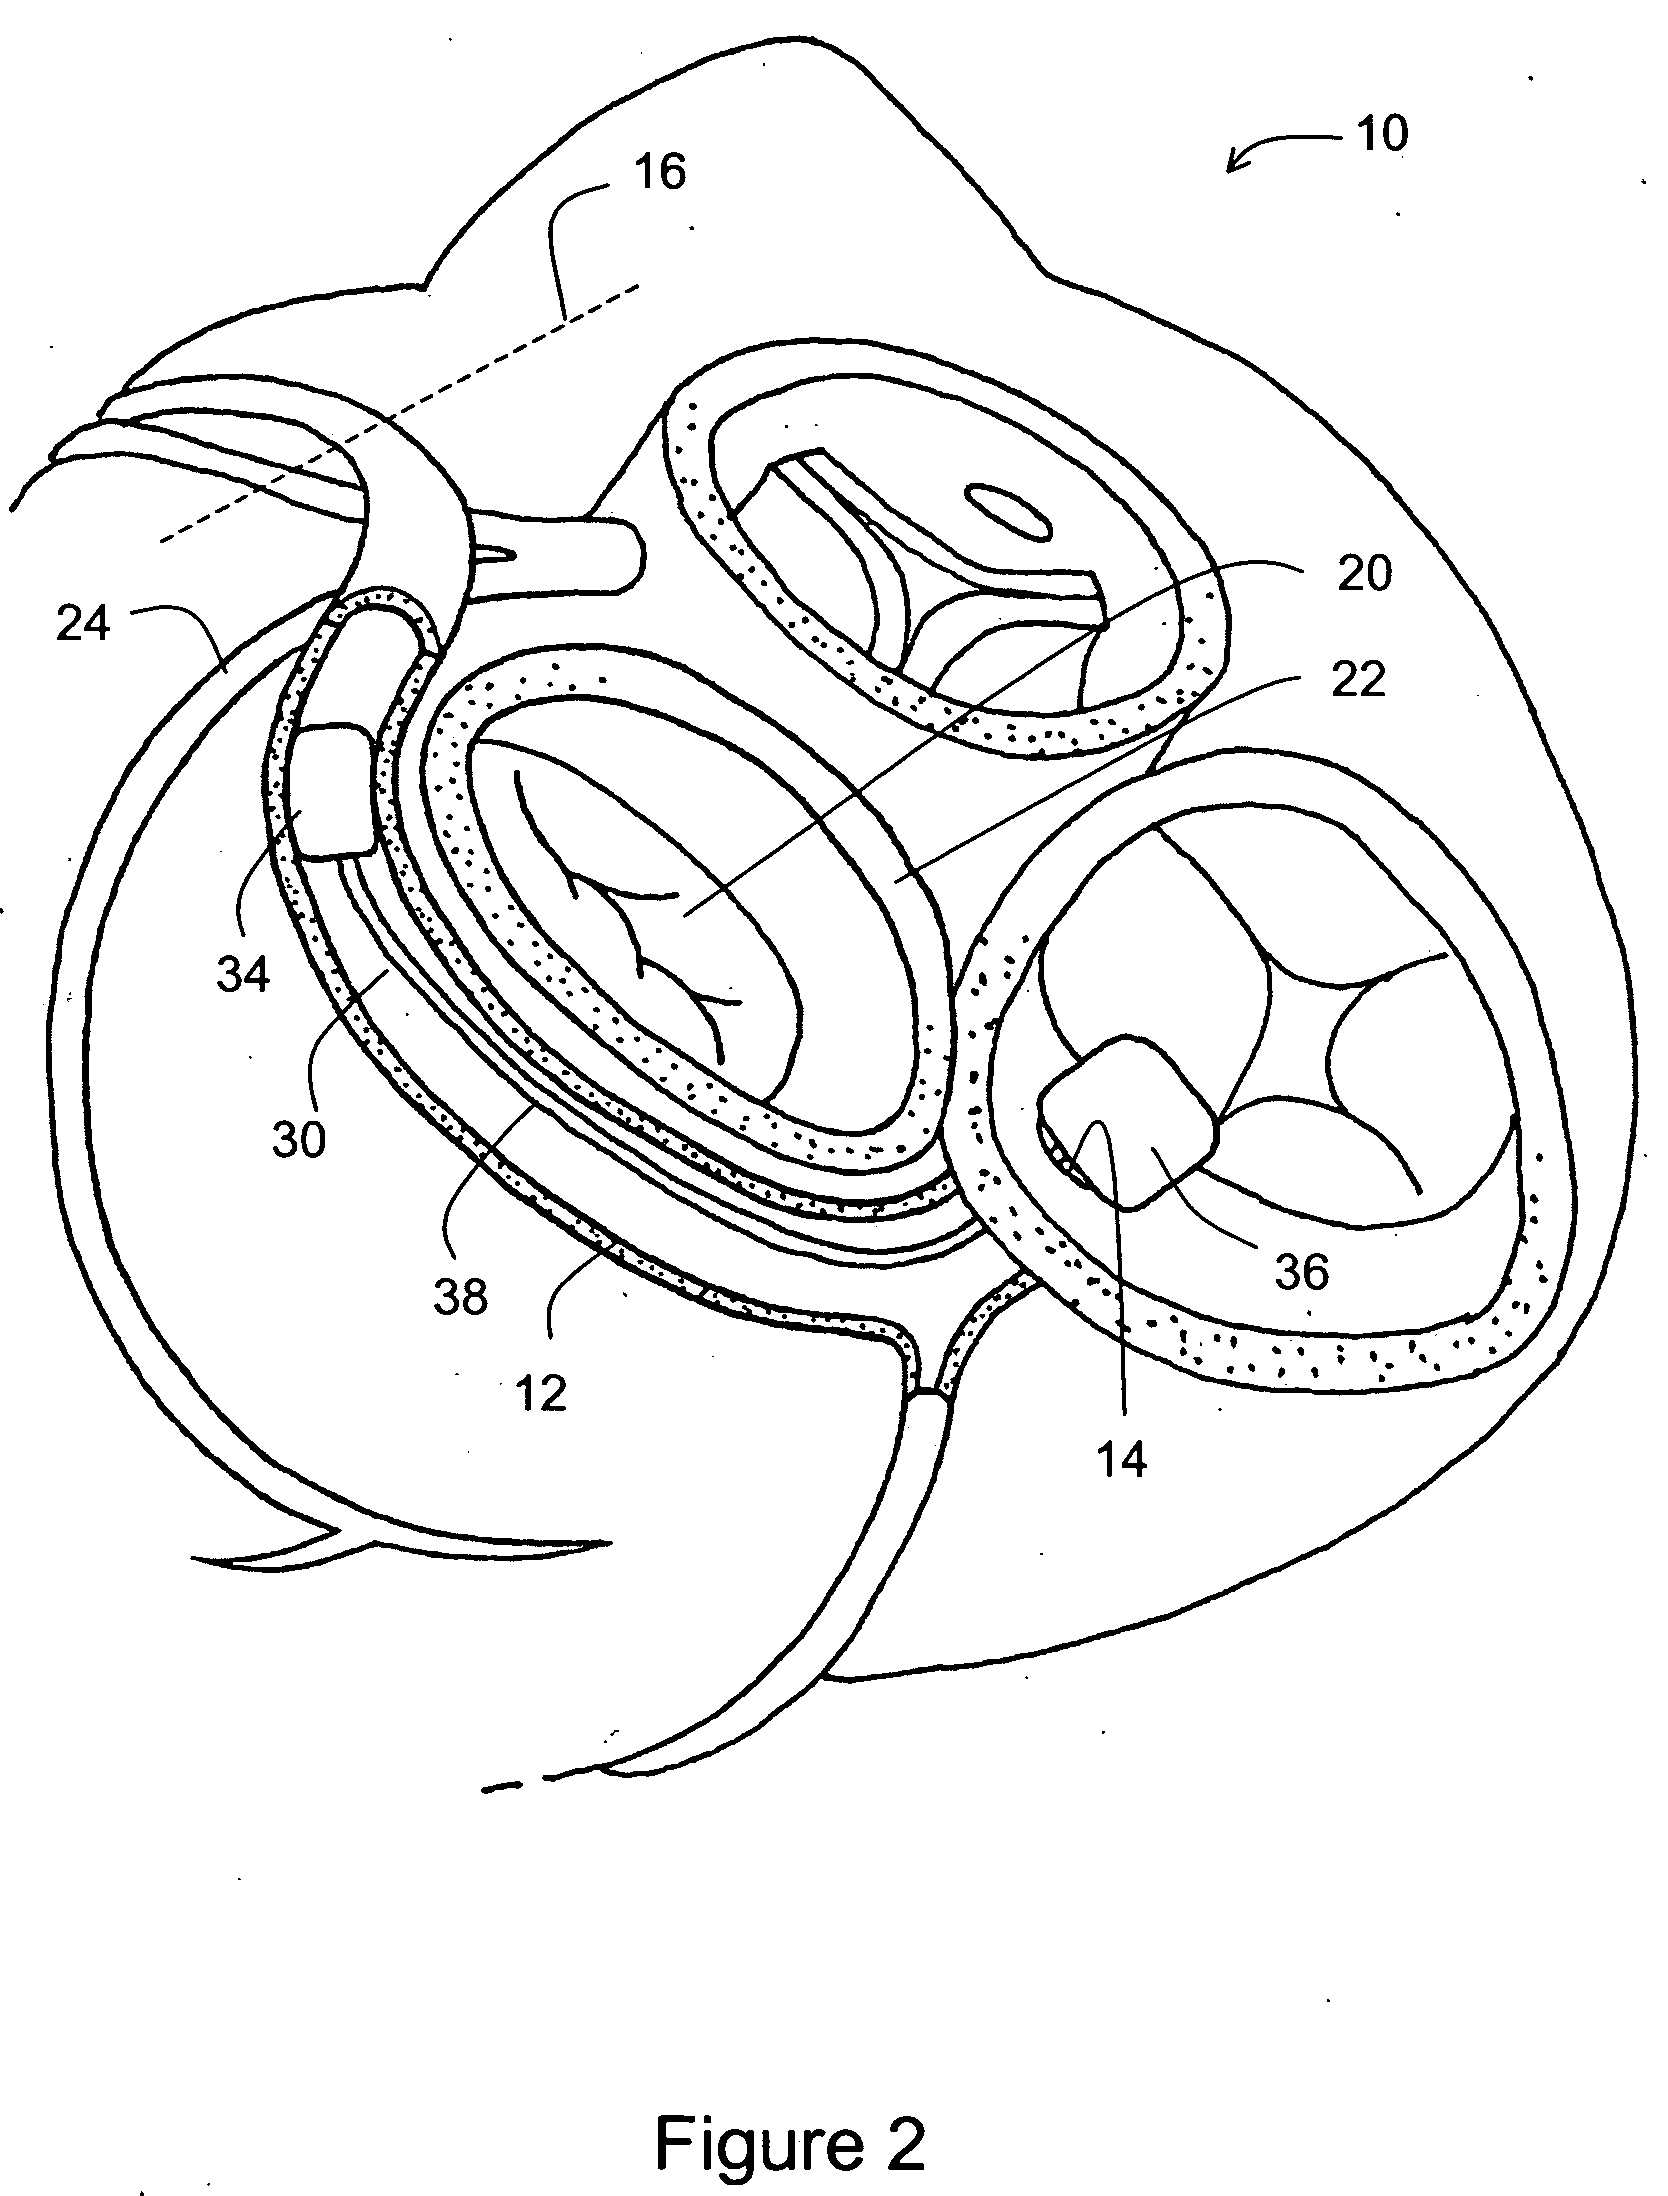 Reduced length tissue shaping device